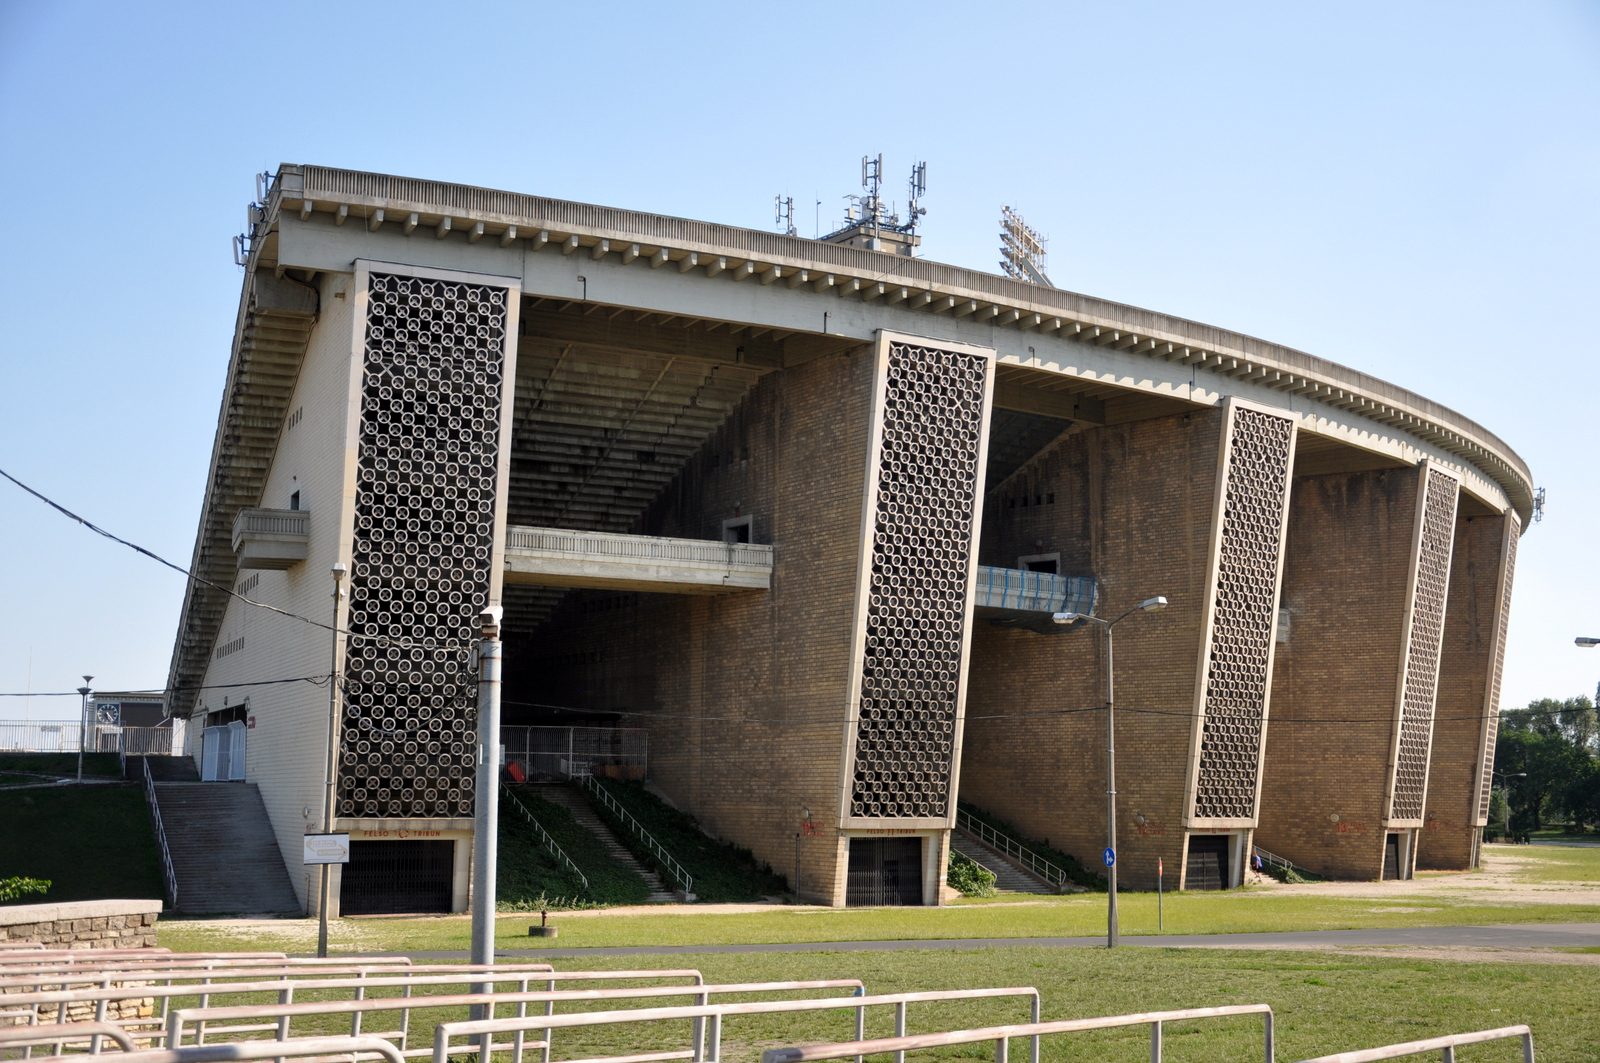 According to György Szöllősi, the Népstadion, left to rot, was a symbol of anti-sport socialist governments.